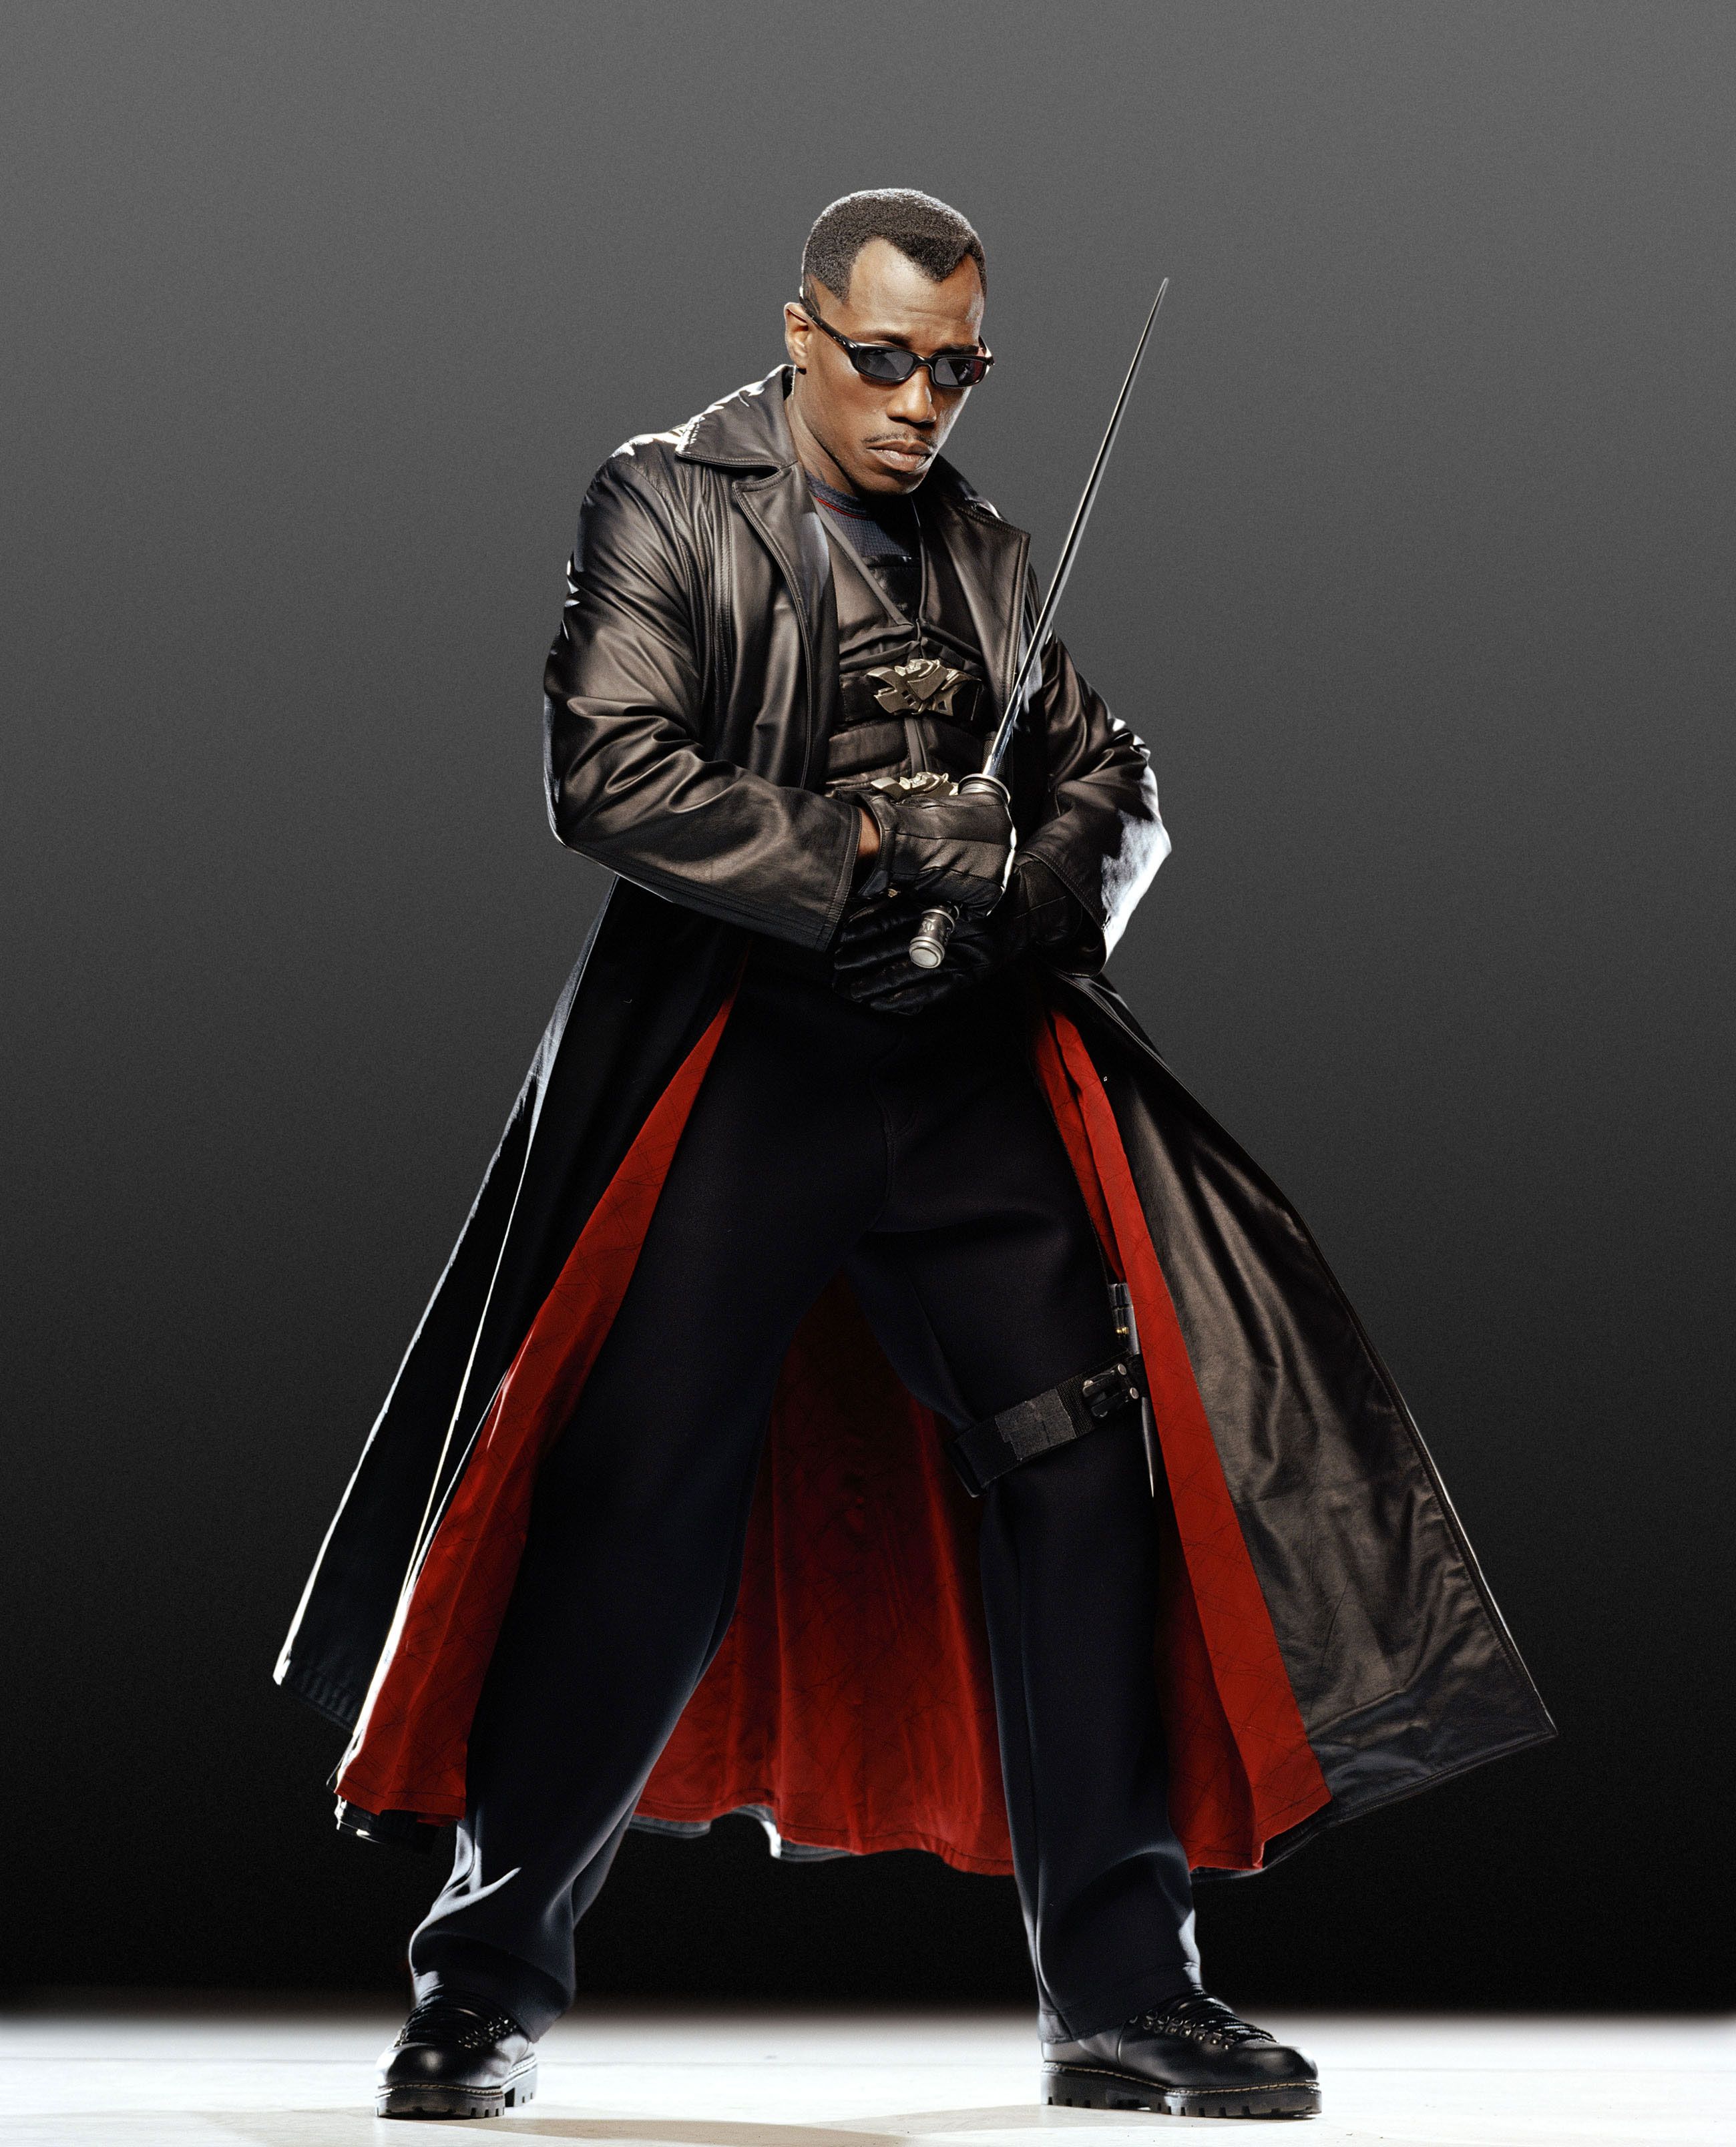 Wesley Snipes is attired fiercely in a black sunglass, a leather outfit, and a sword in his hand